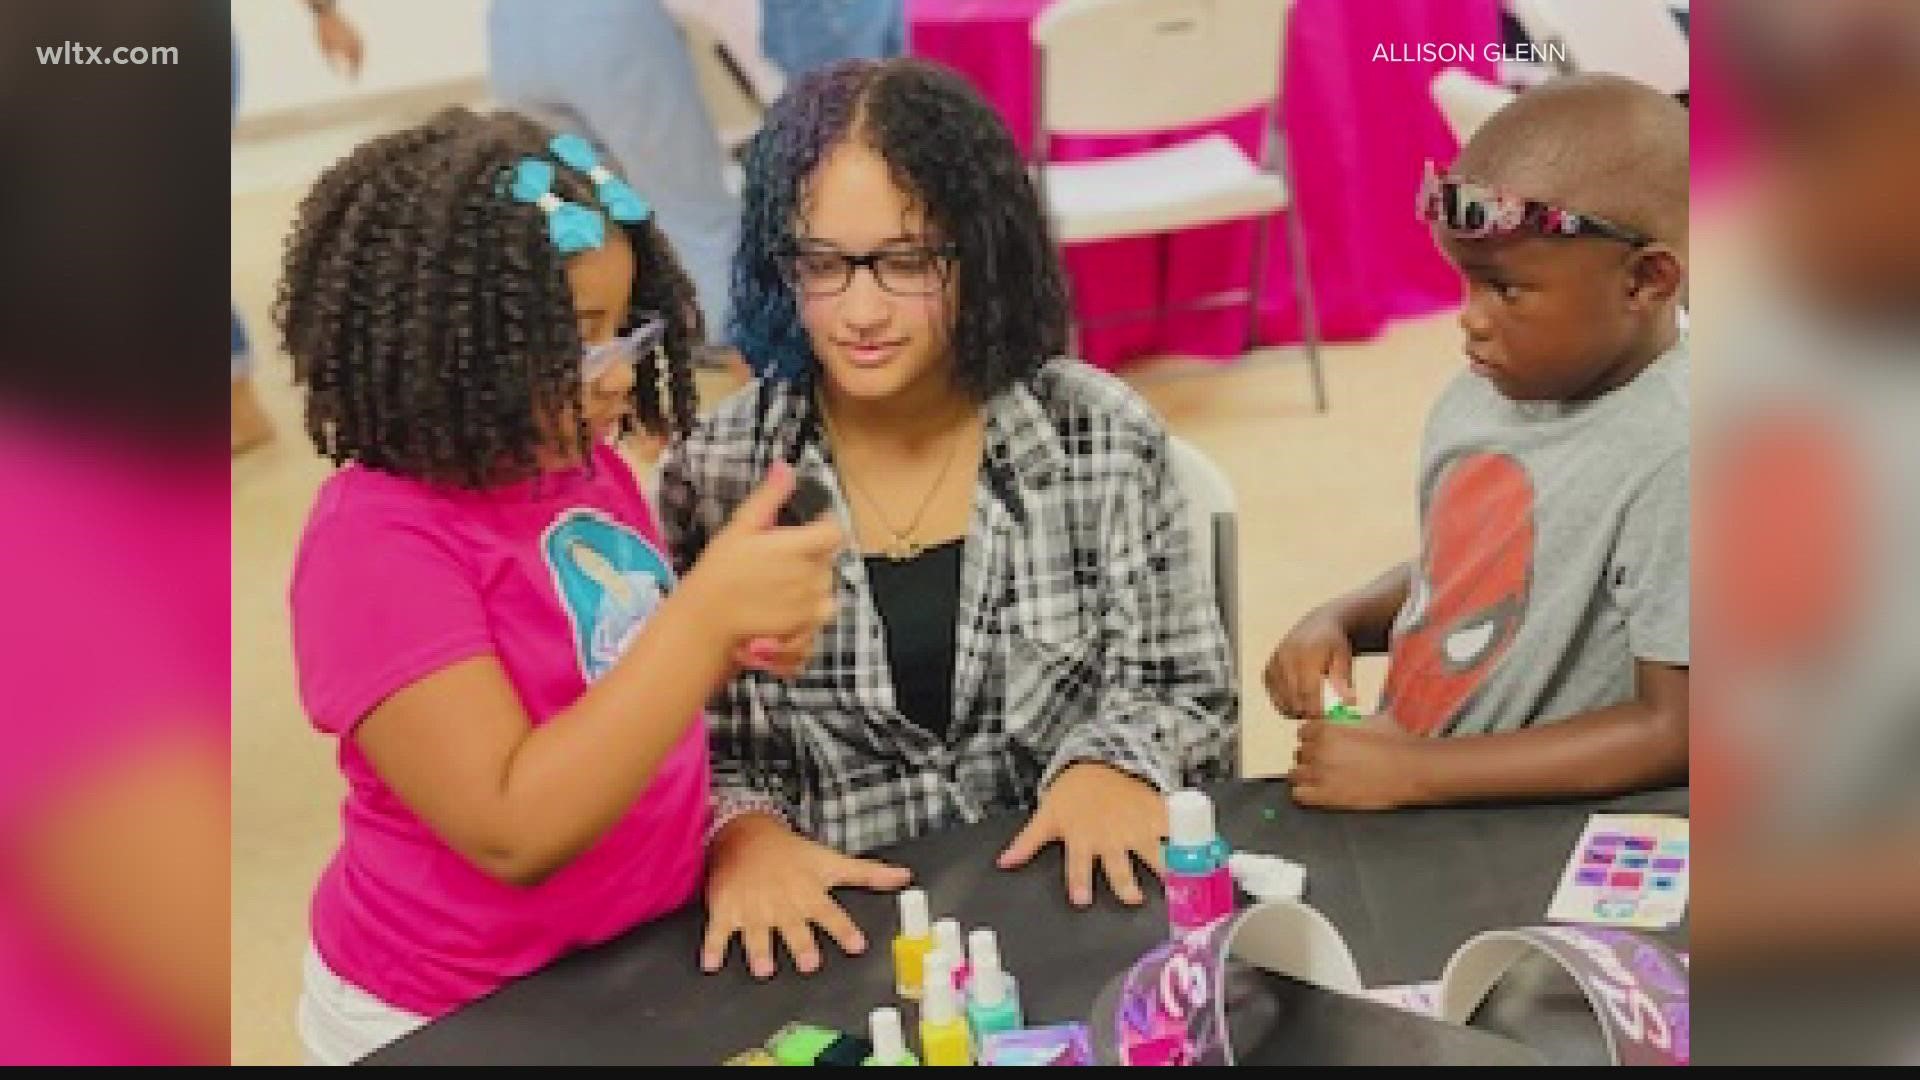 Elizabeth Glenn recently launched a nail polish line called SazzE Nailz in Orangeburg - and she's only six years old.